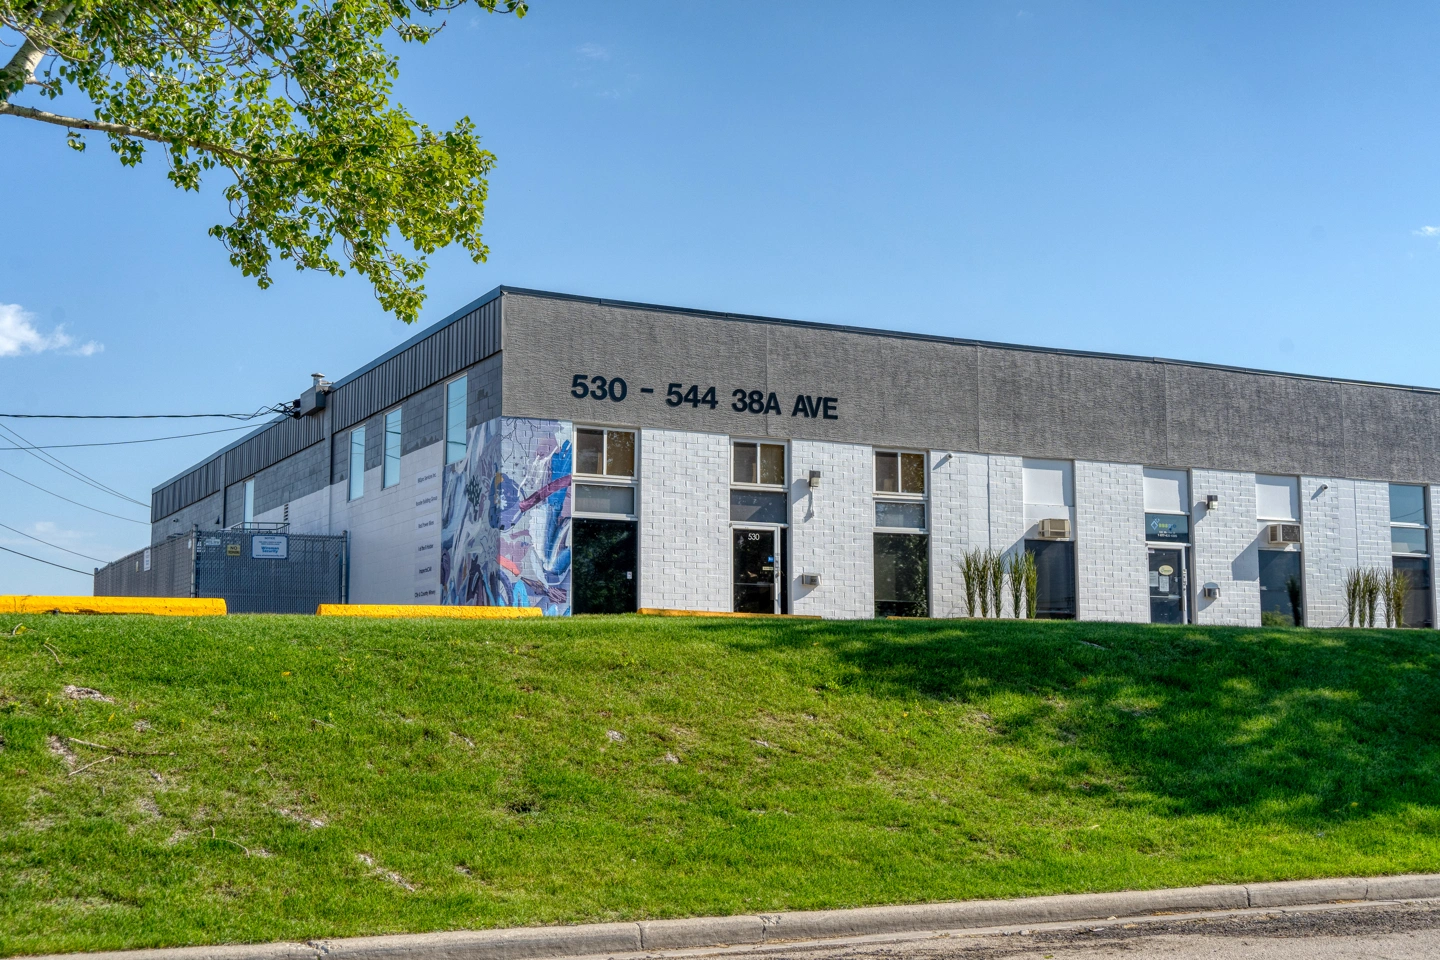 530 - 544 38A Ave SE, 530 - 544 38A Ave SE, Calgary, Alberta, T2G 1X4, Industrial, For Lease